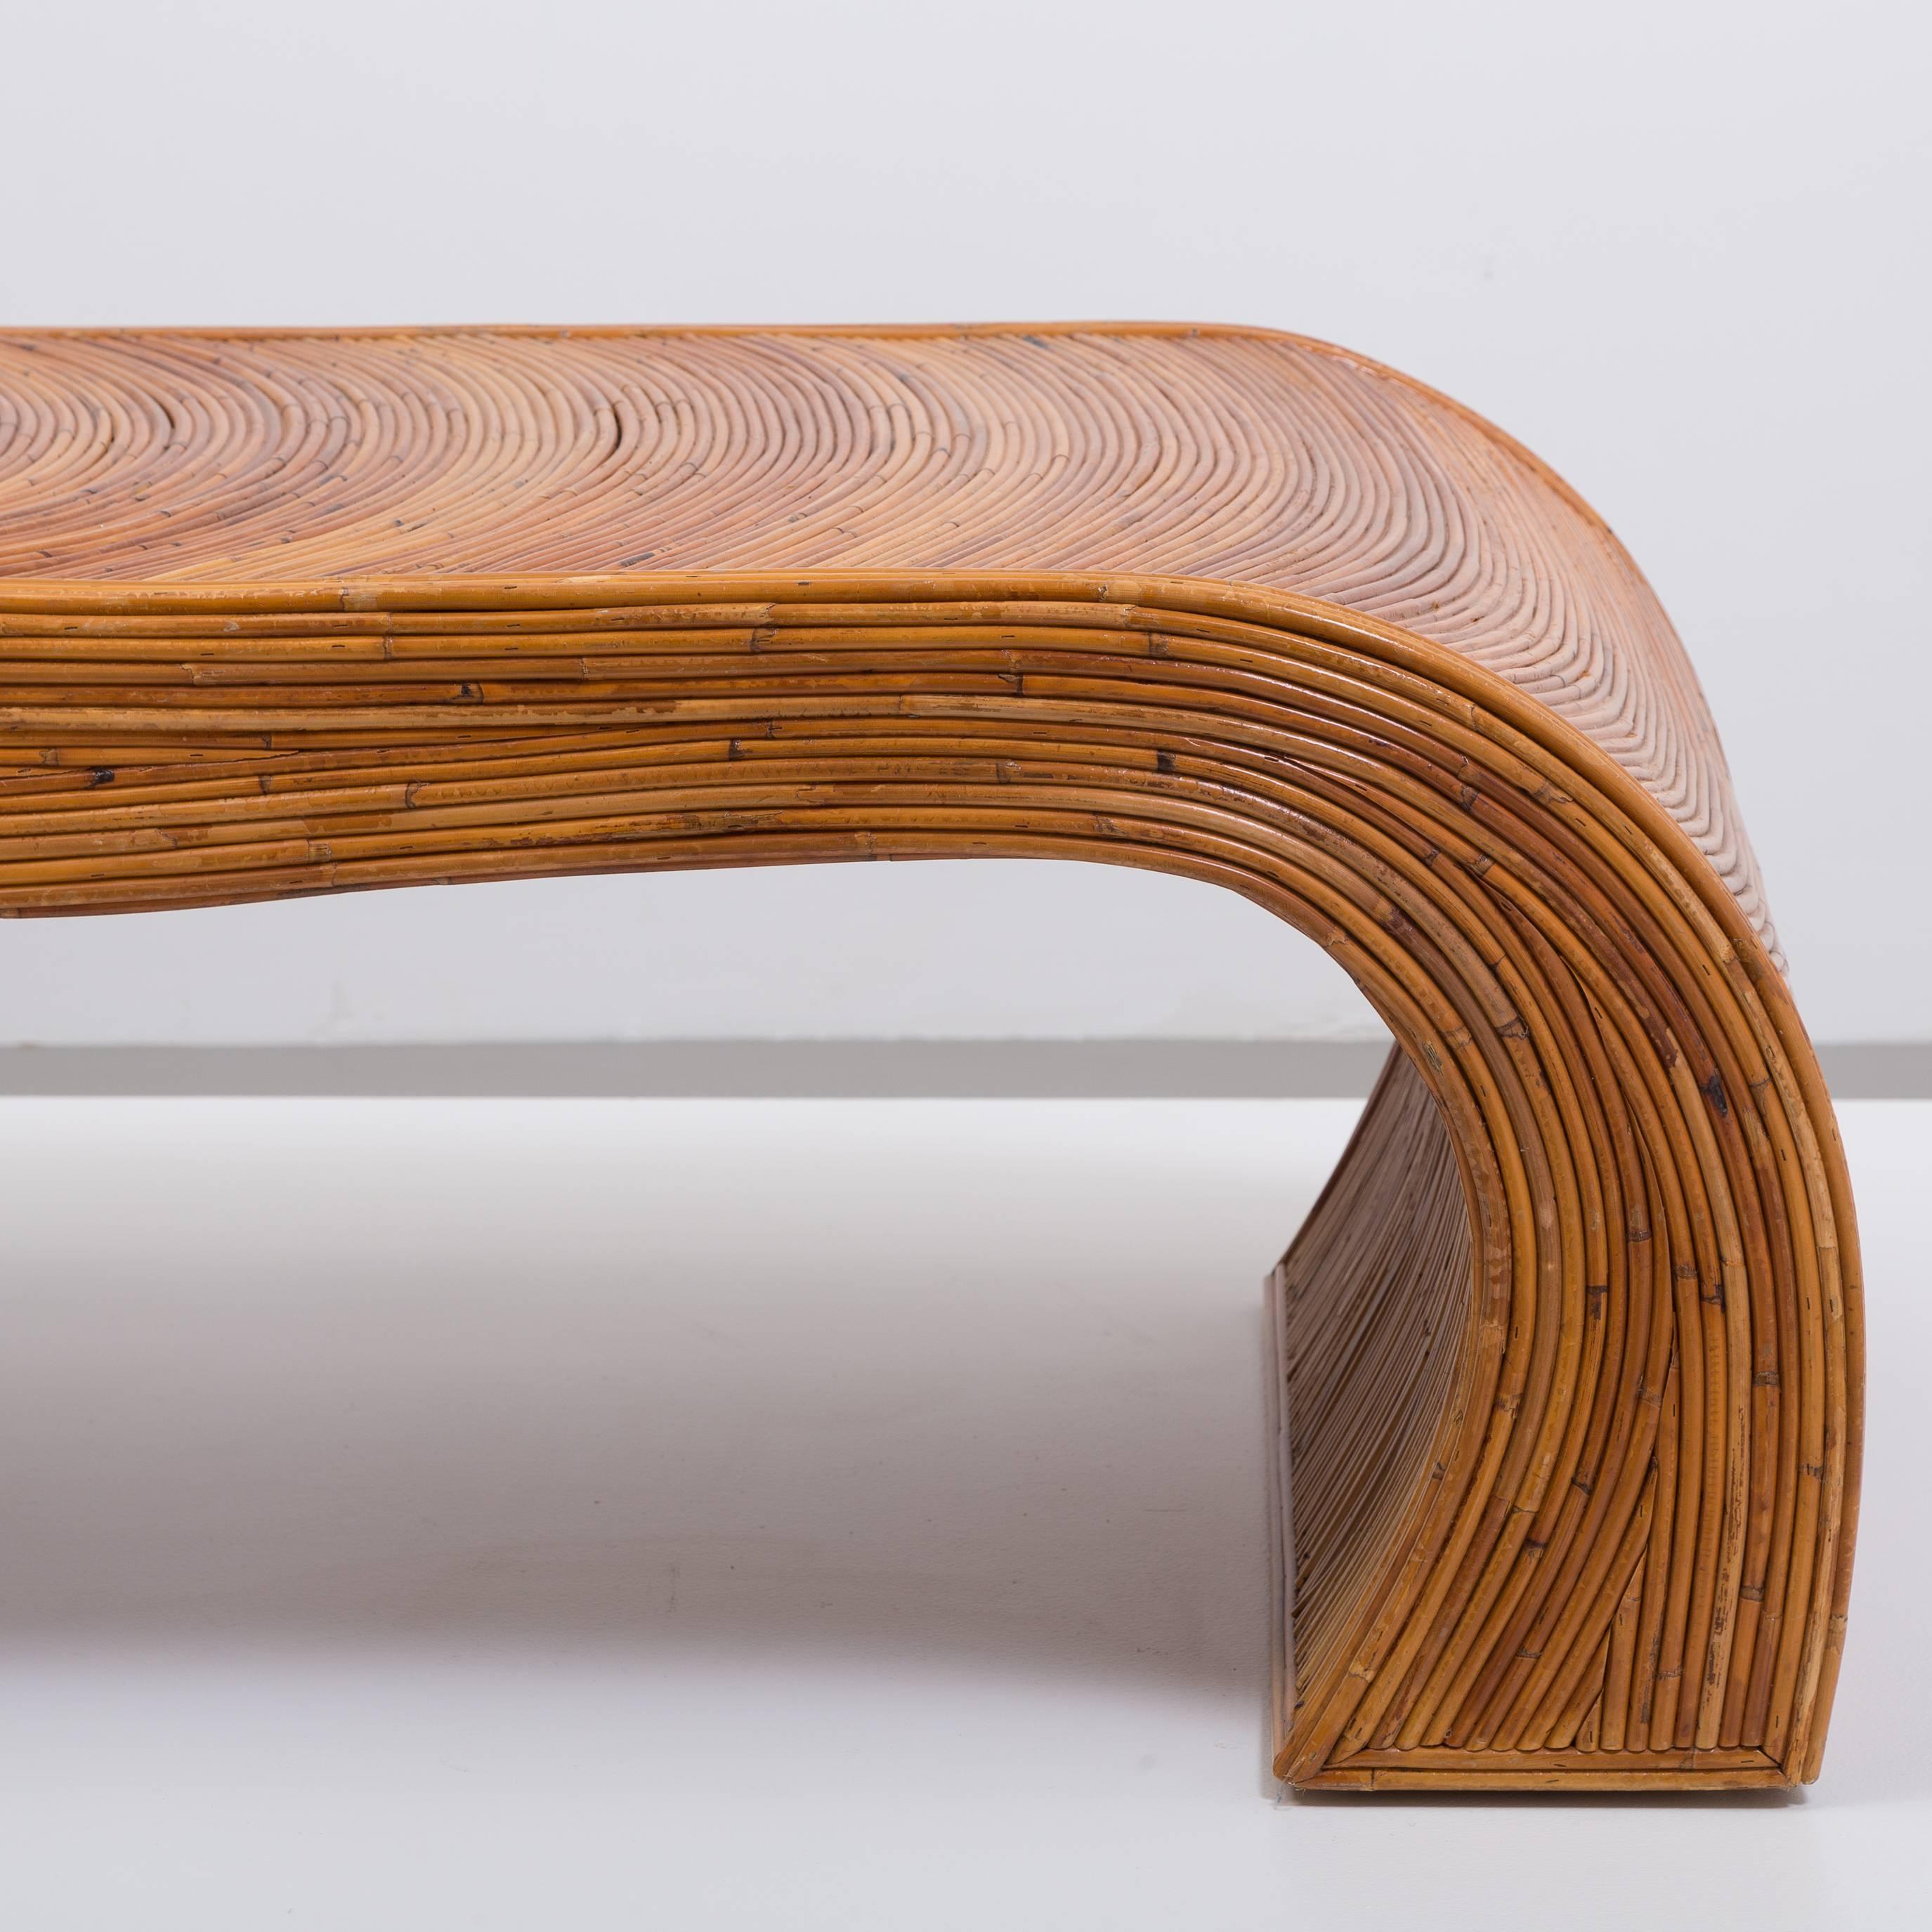 Gabriella Crespi Attributed Waterfall Bamboo Coffee Table, 1970s 1